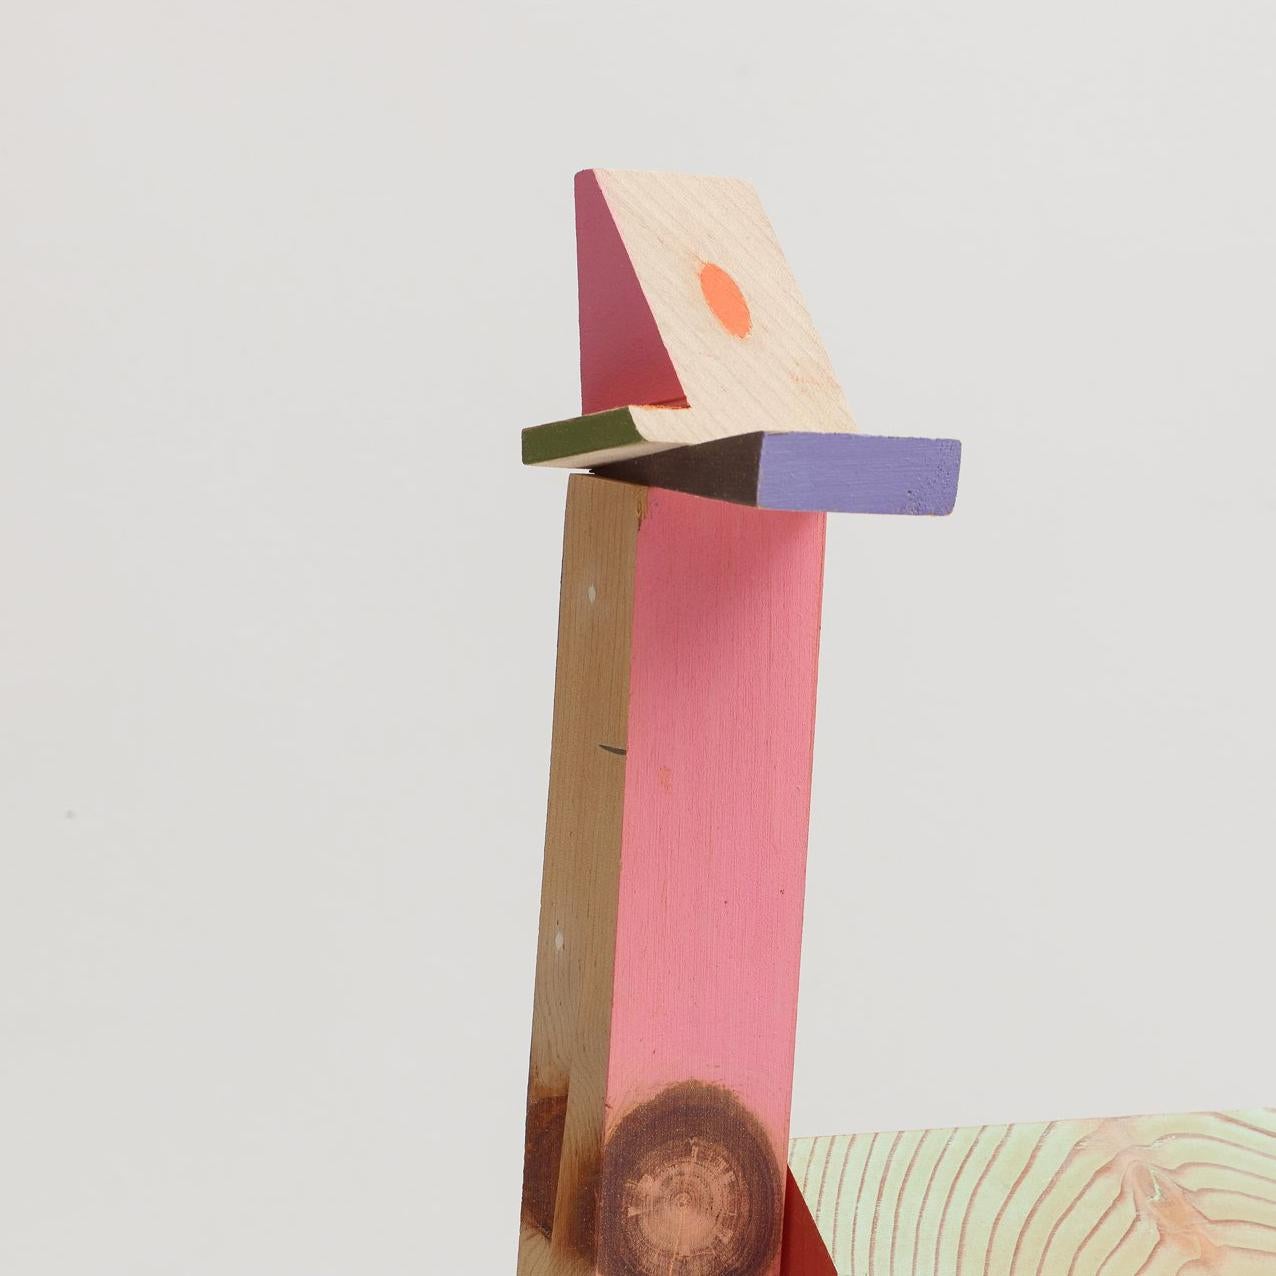 Jim Osman’s sculptures center on explorations of structure, architecture and space. Working with wood, paint, and construction paper, Osman instinctively combines materials, forms and colors to create dynamic 3-dimensional compositions. His